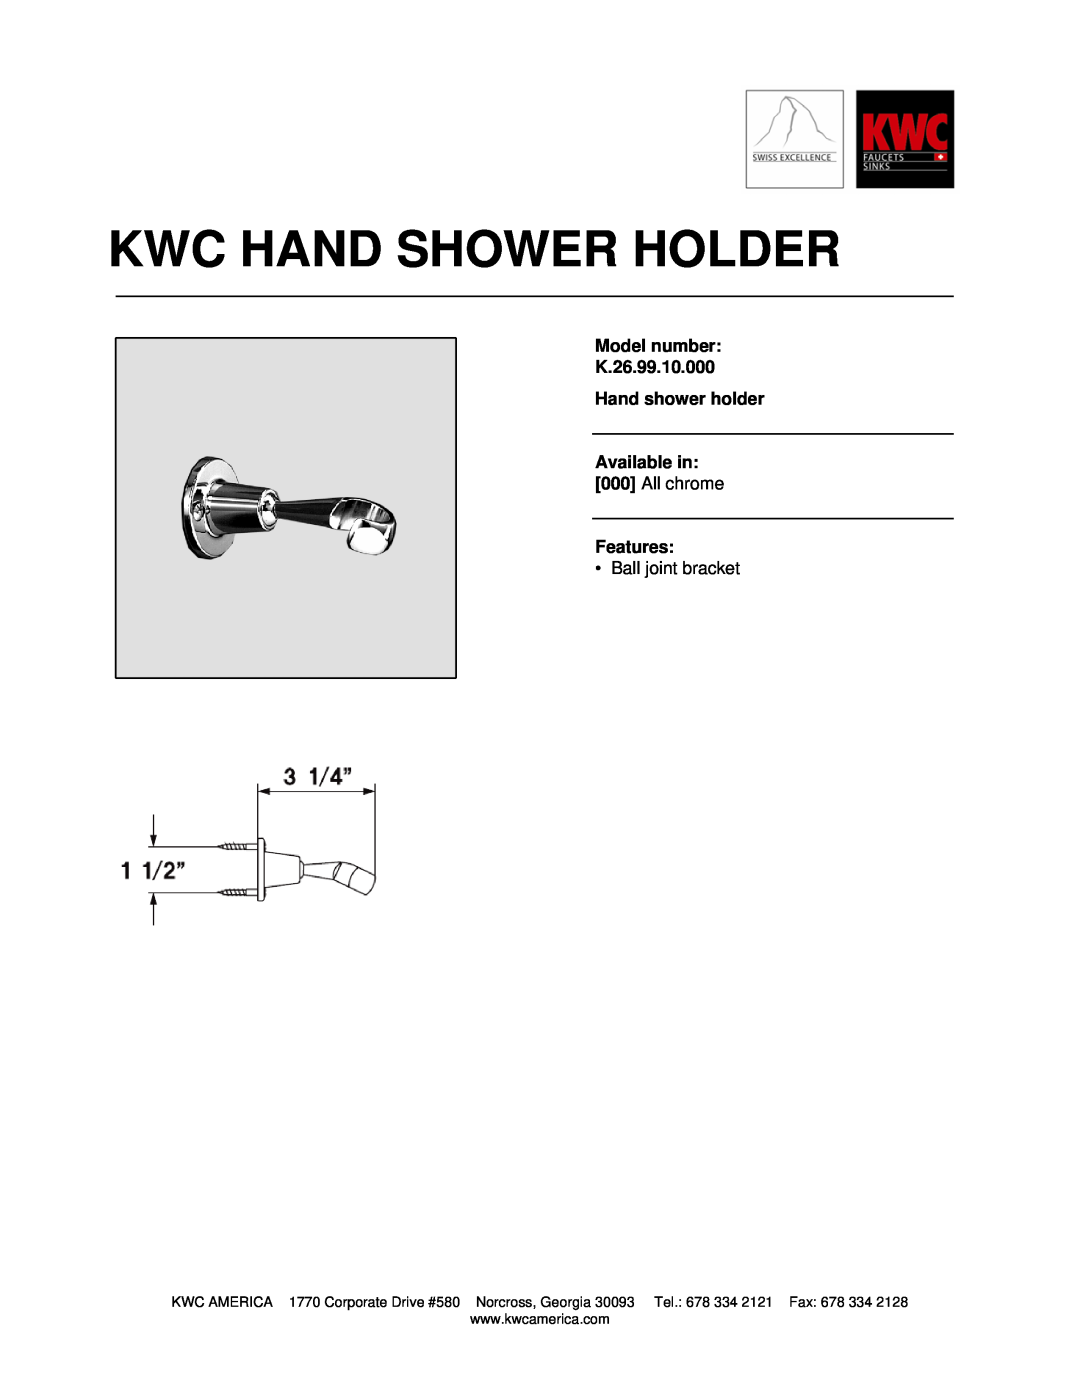 KWC manual Kwc Hand Shower Holder, Model number K.26.99.10.000 Hand shower holder, Available in 000 All chrome Features 